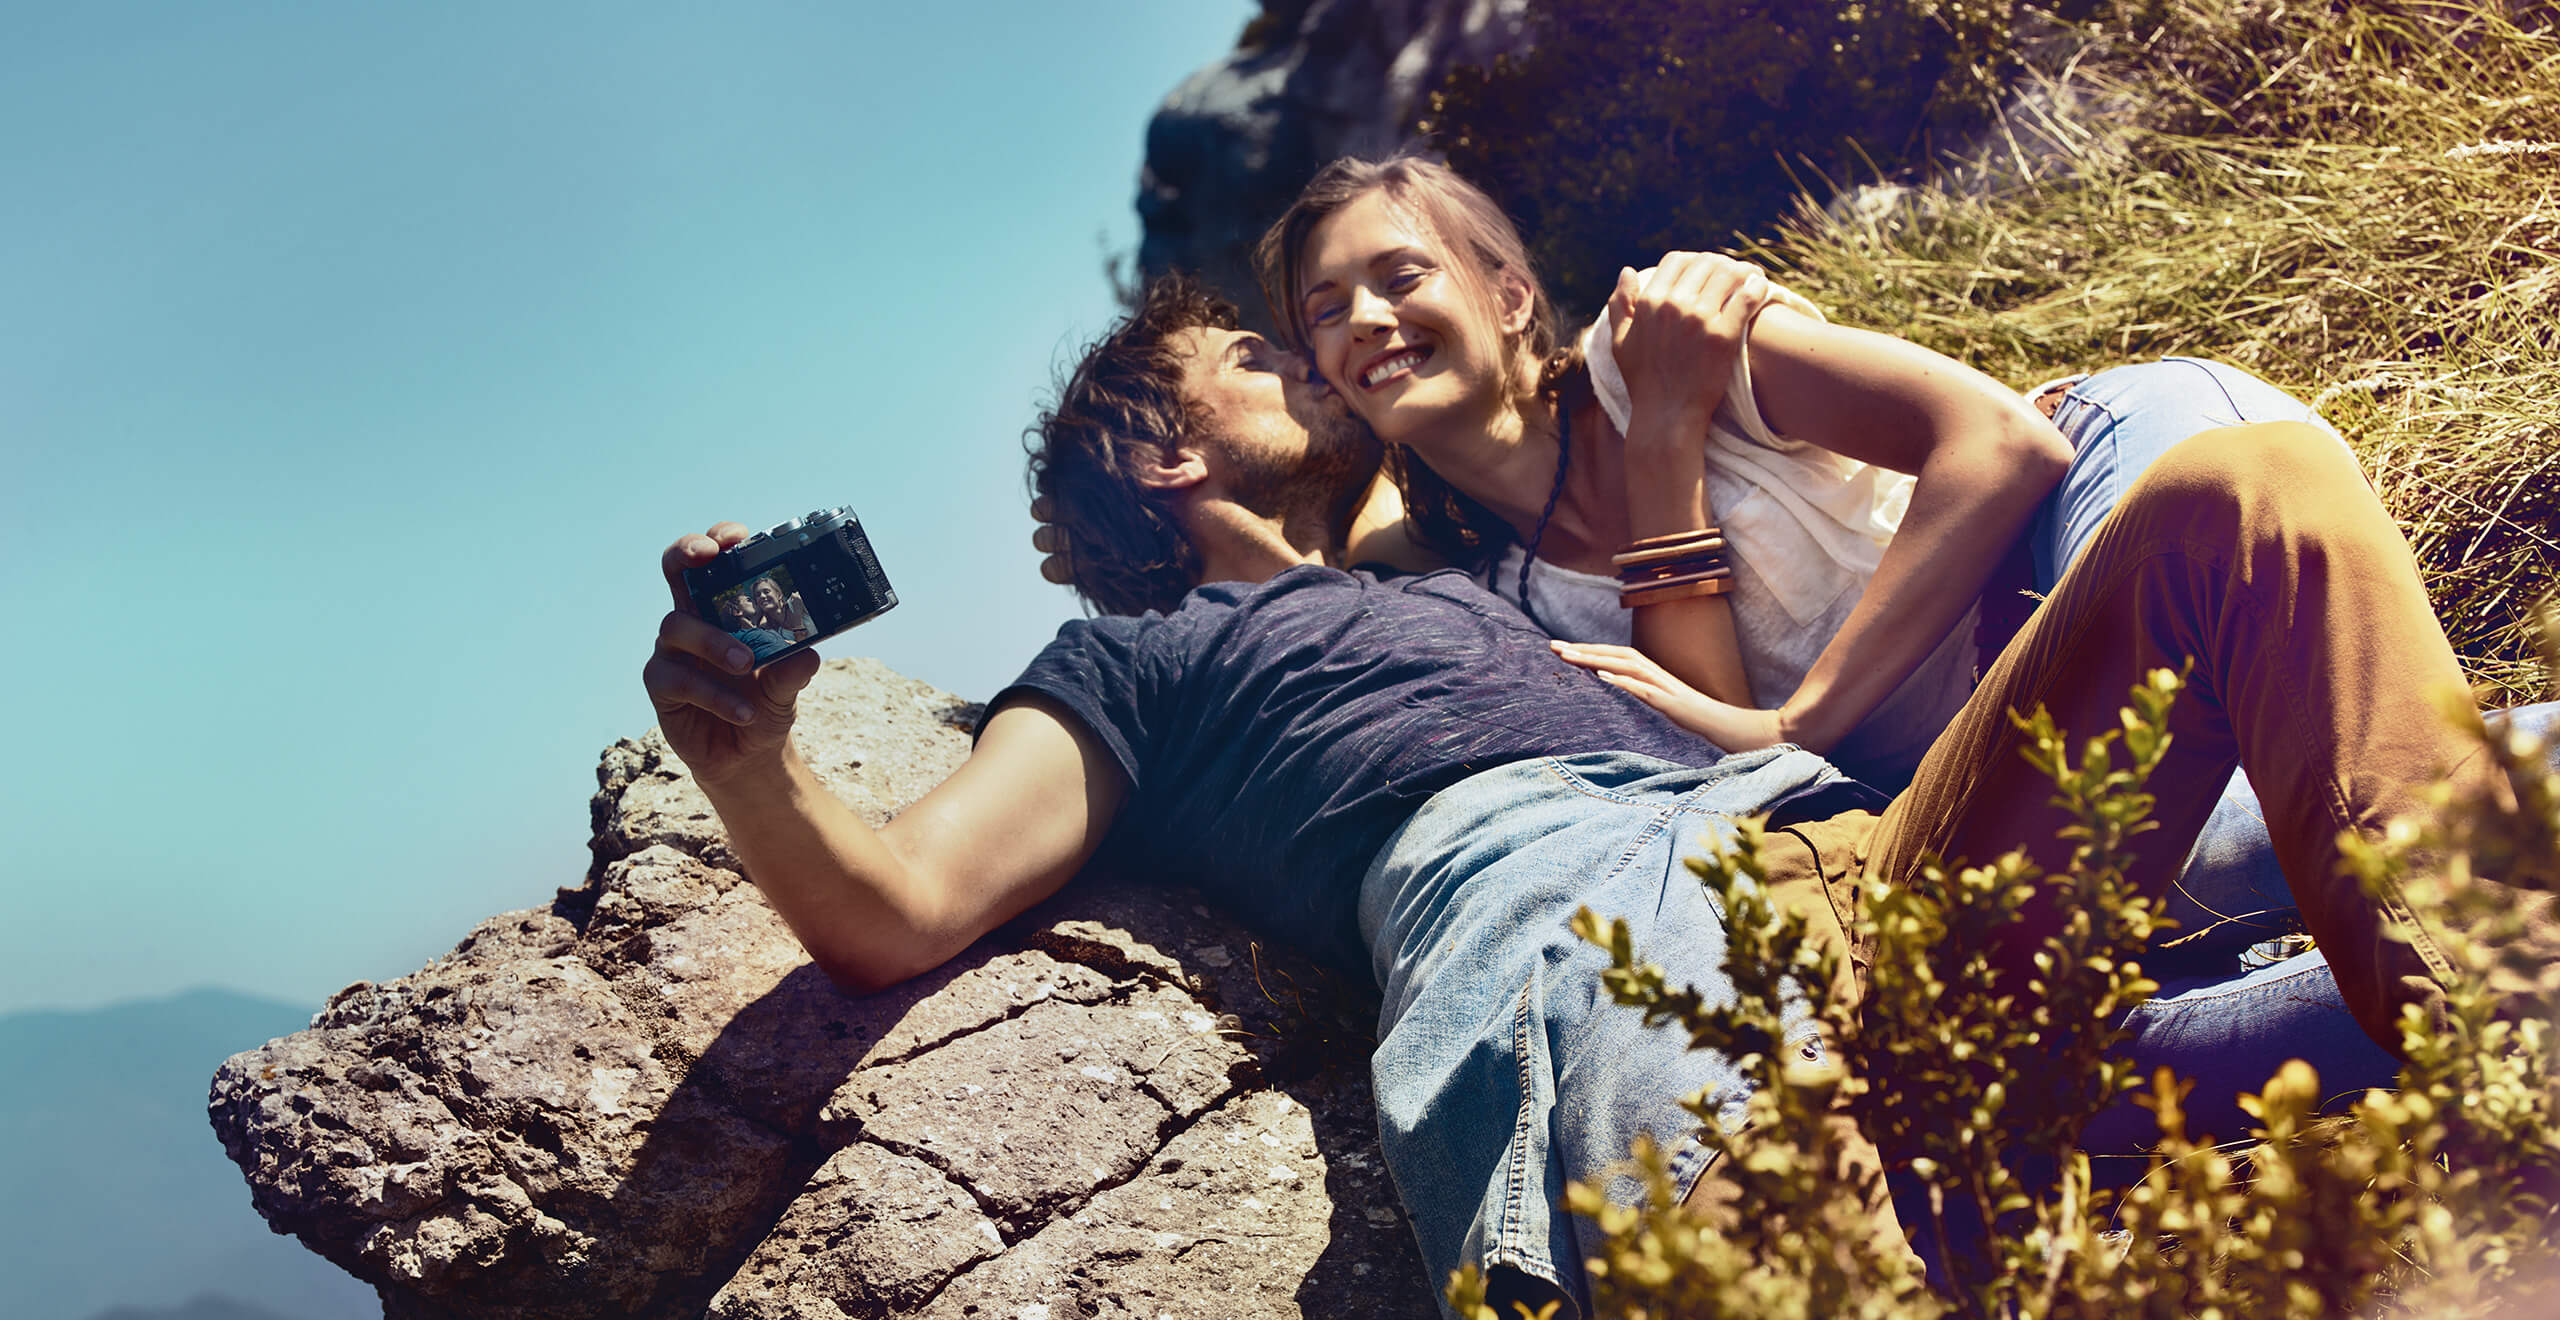 SEAT new car services warranty extension  maintenance – A couple laying in mountains taking a selfie